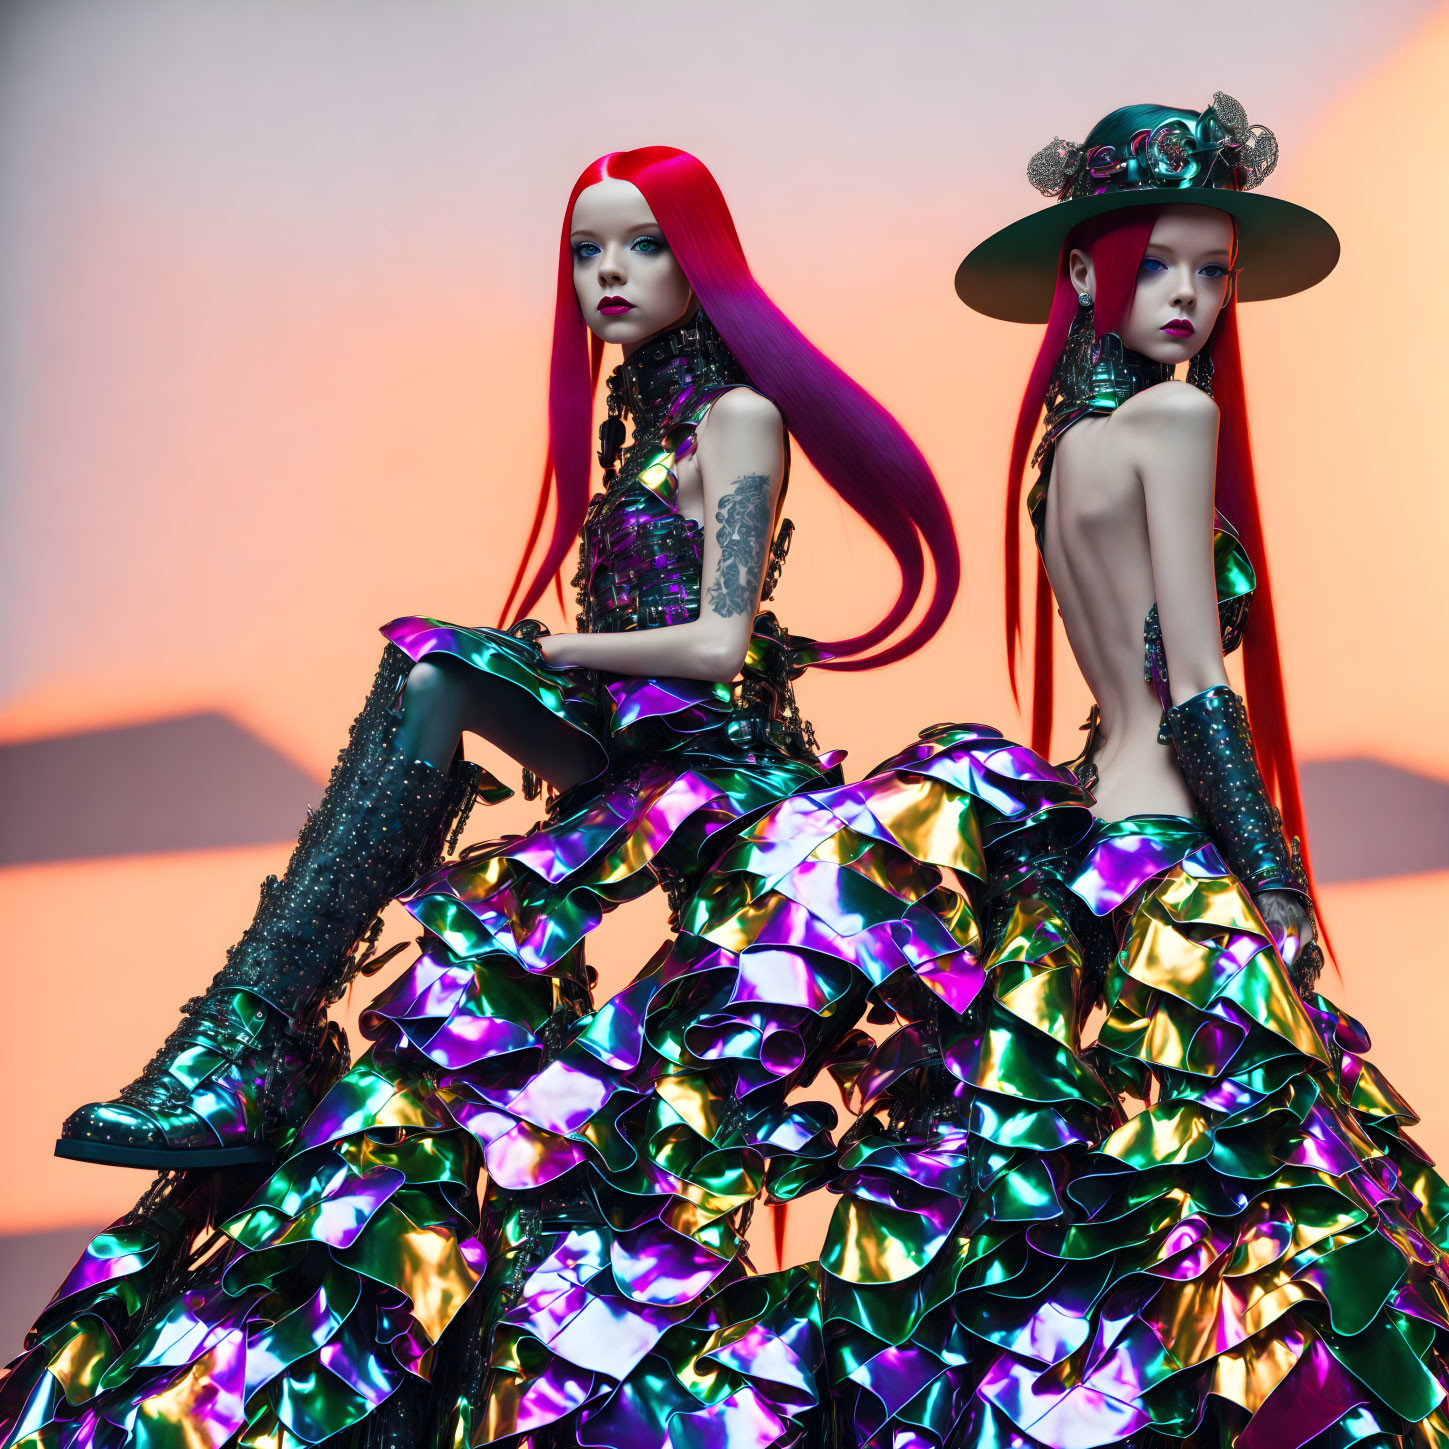 Striking red-haired models in futuristic outfits on colorful background